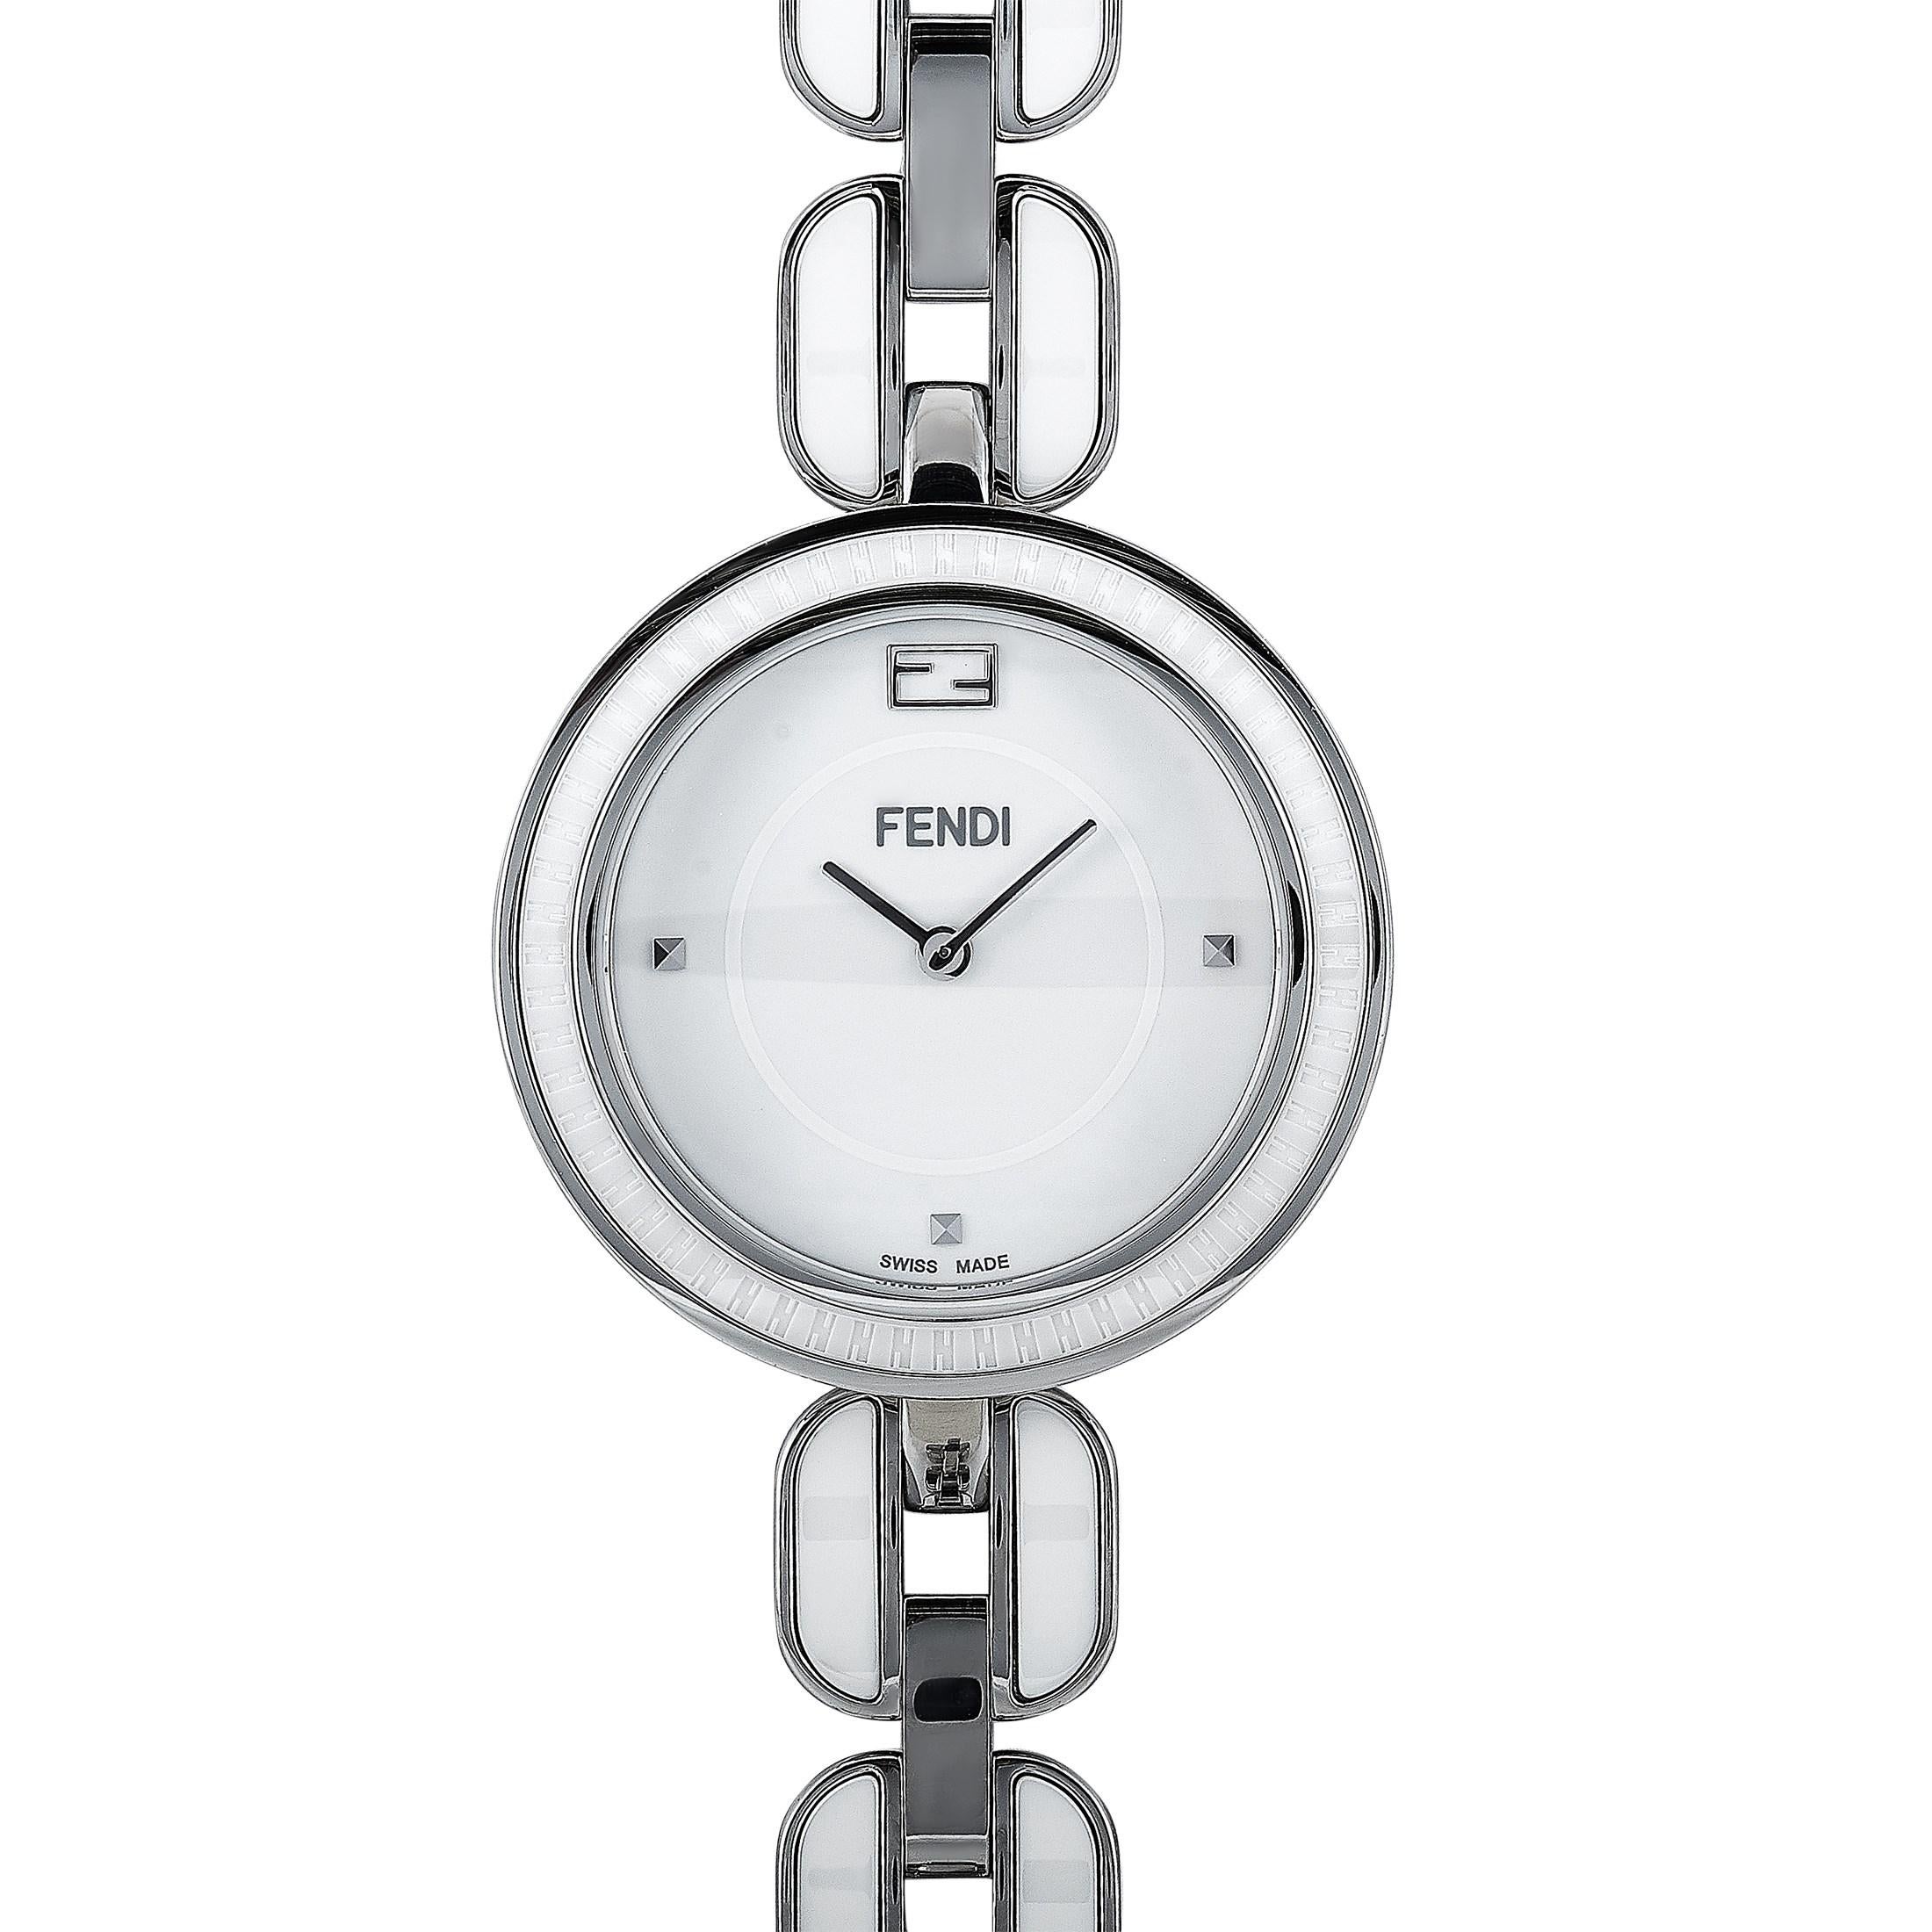 The Fendi My Way watch, reference number F359034004, comes with a 36 mm stainless steel case that boasts a bezel with a white ceramic inlay. The case is presented on a stainless steel bracelet with white ceramic inserts. This model is powered by a